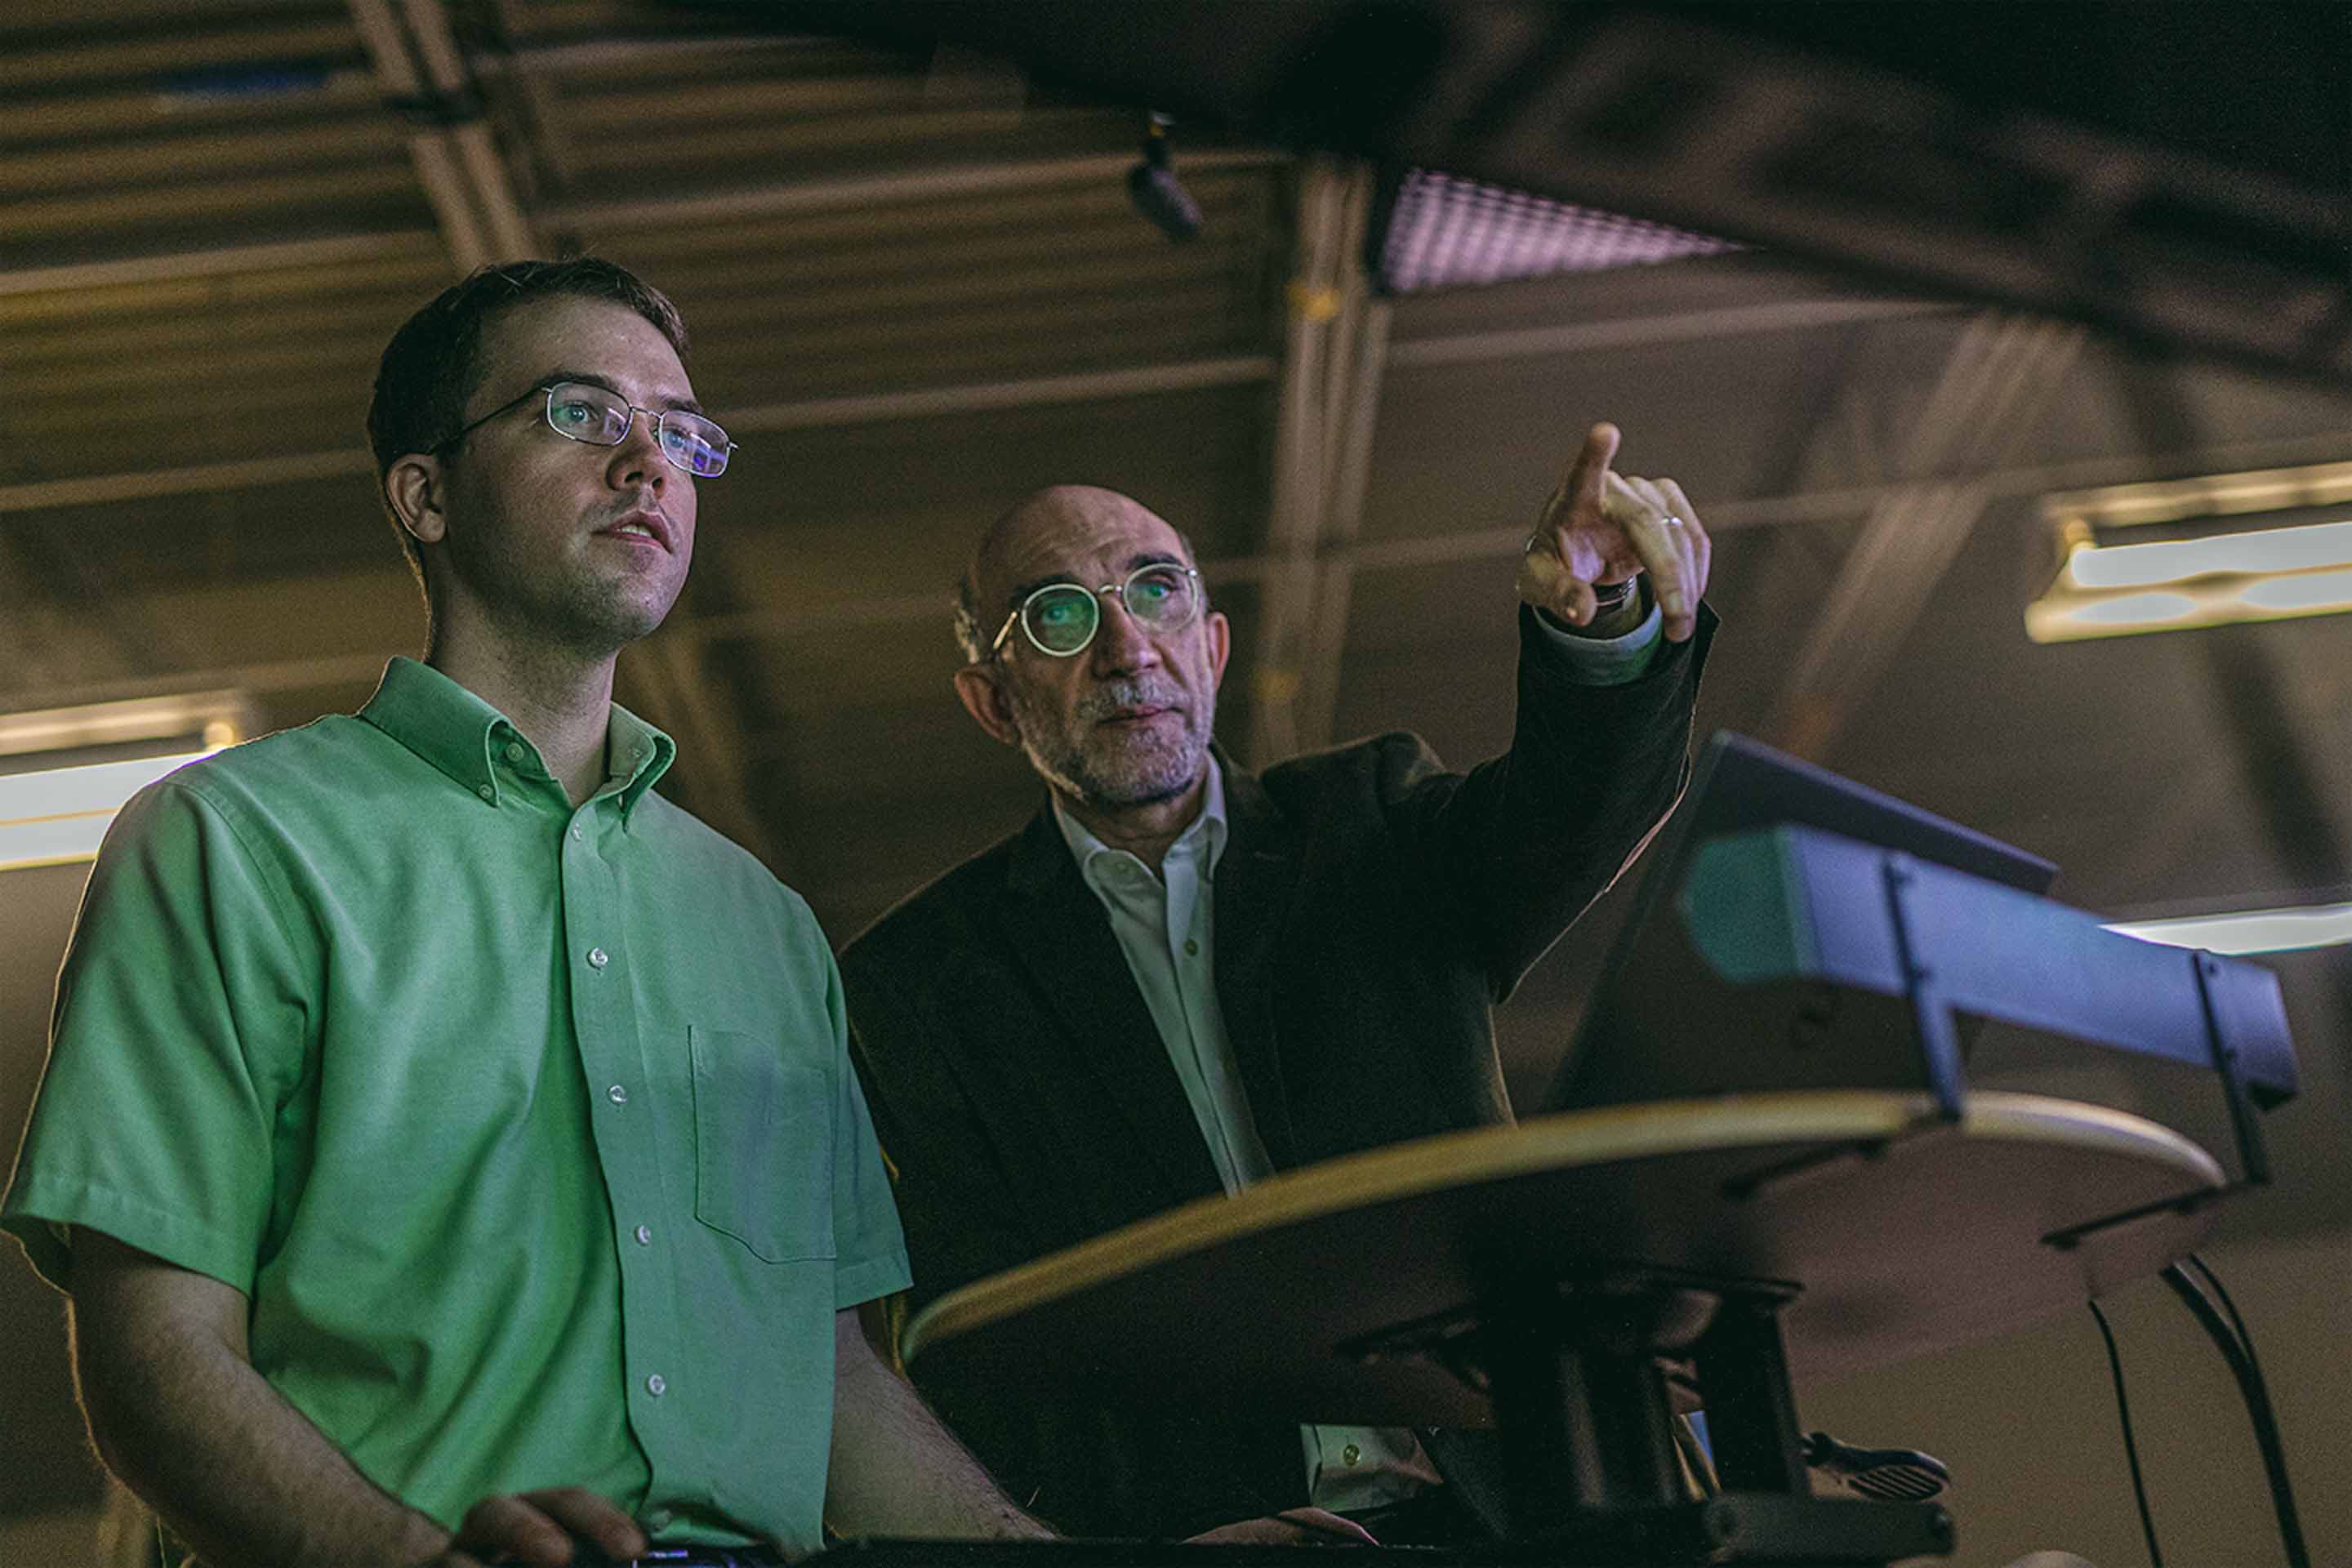 MSU Foundation Professor Hayder Radha (left) and doctoral student Daniel Kent work in the Connected and Autonomous Networked Vehicles for Active Safety, or CANVAS, lab.